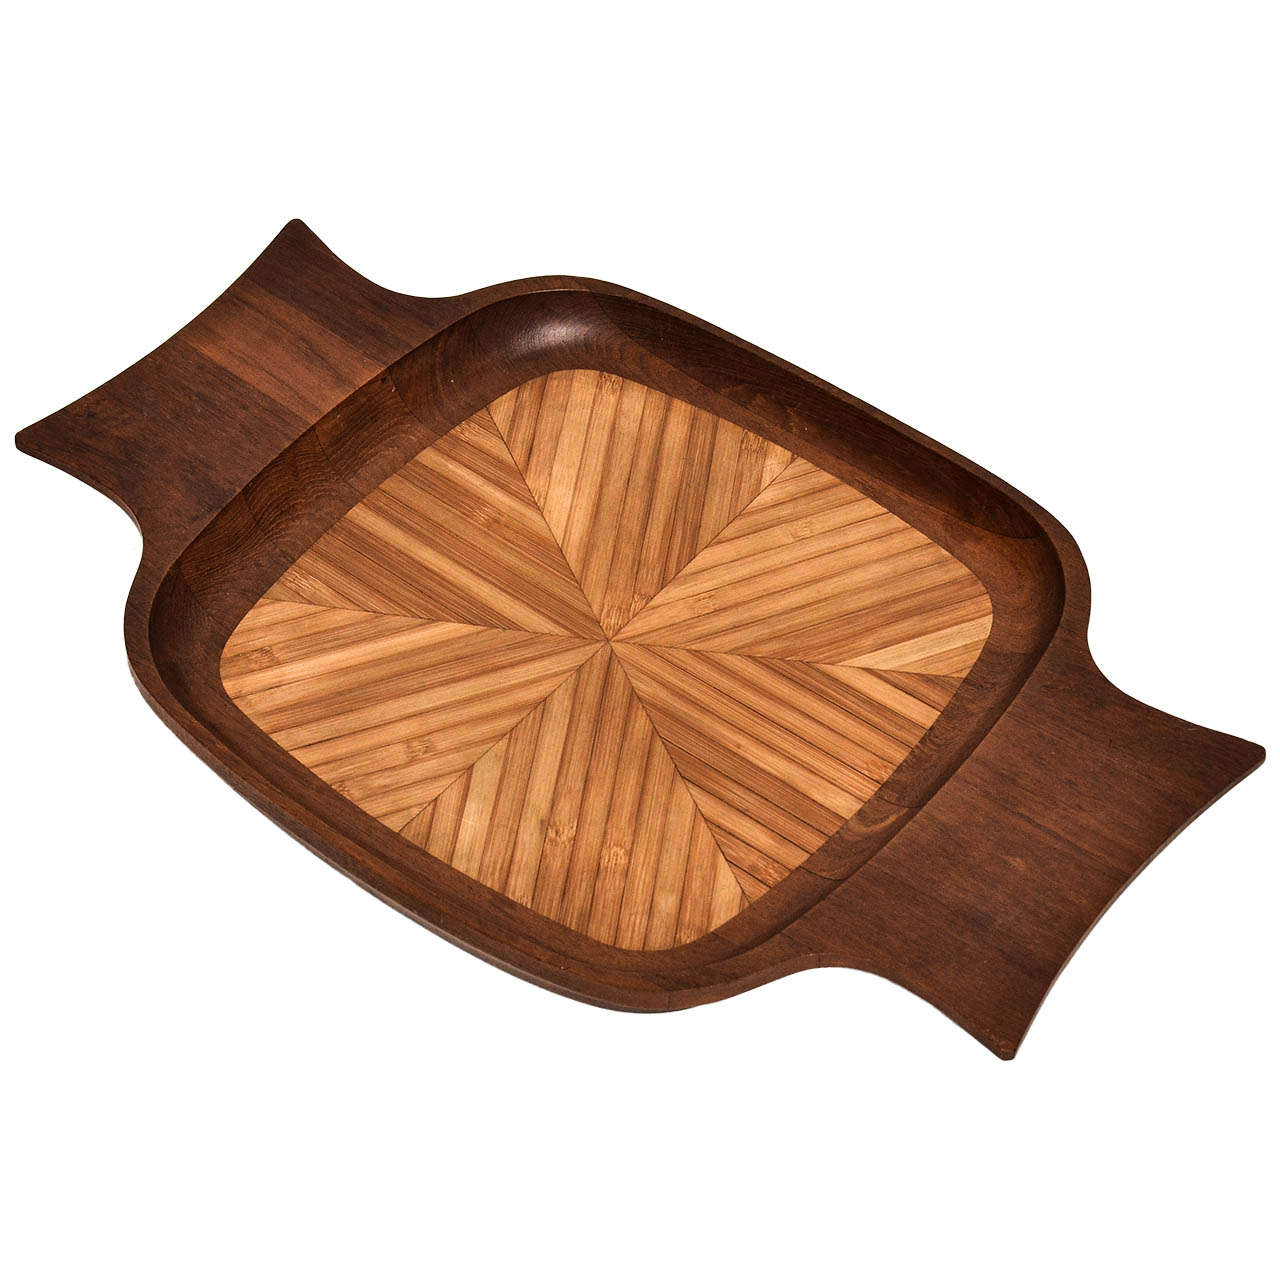 Quistgaard Teak and Bamboo Tray, Danish, circa 1960 For Sale